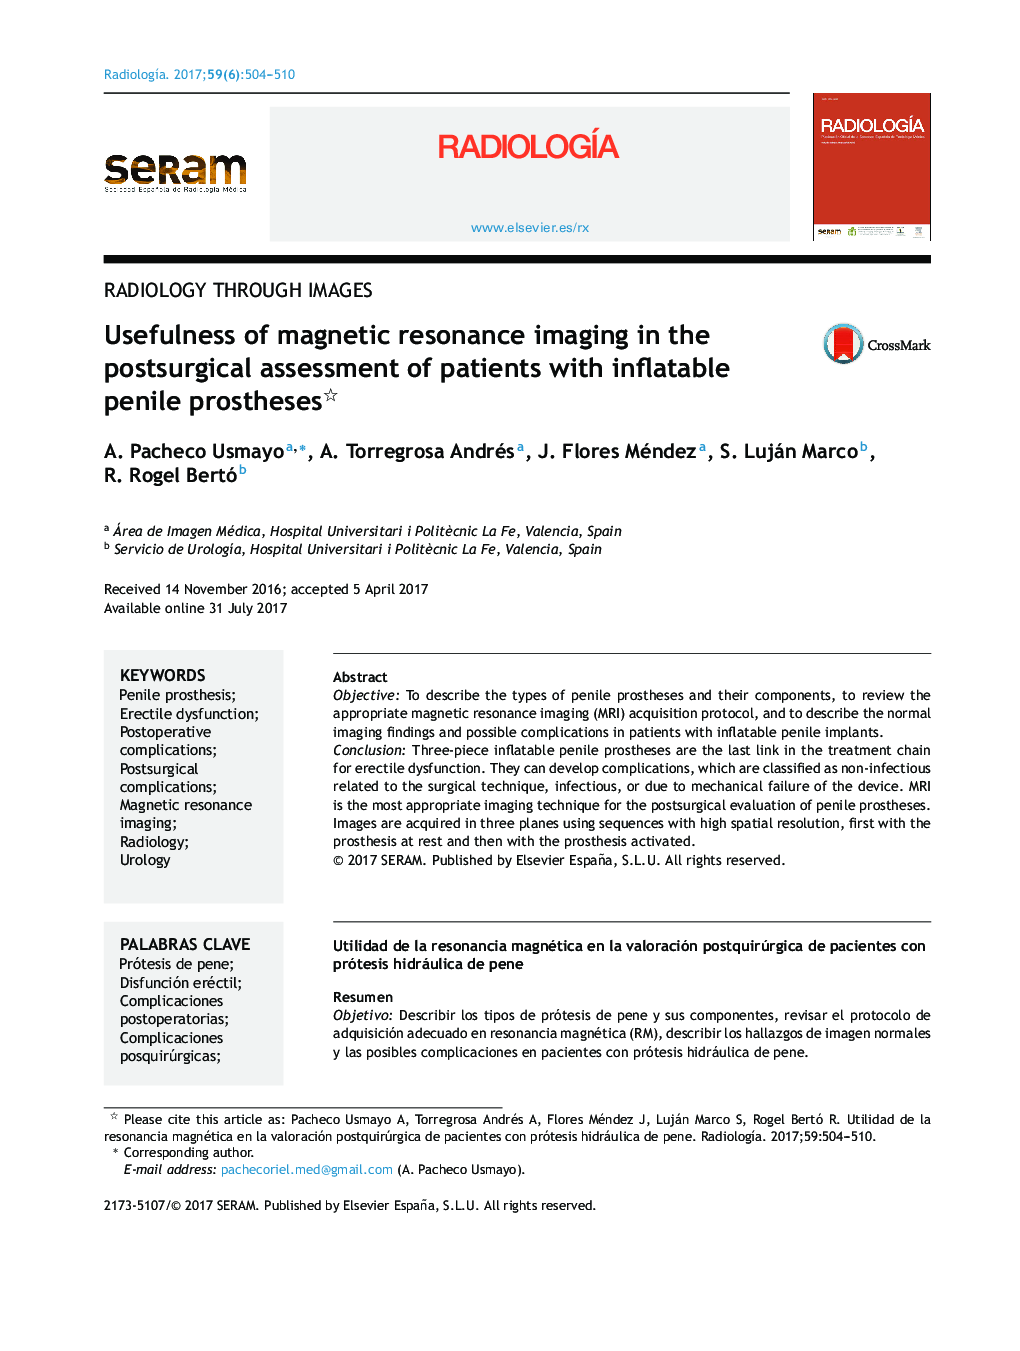 Usefulness of magnetic resonance imaging in the postsurgical assessment of patients with inflatable penile prostheses